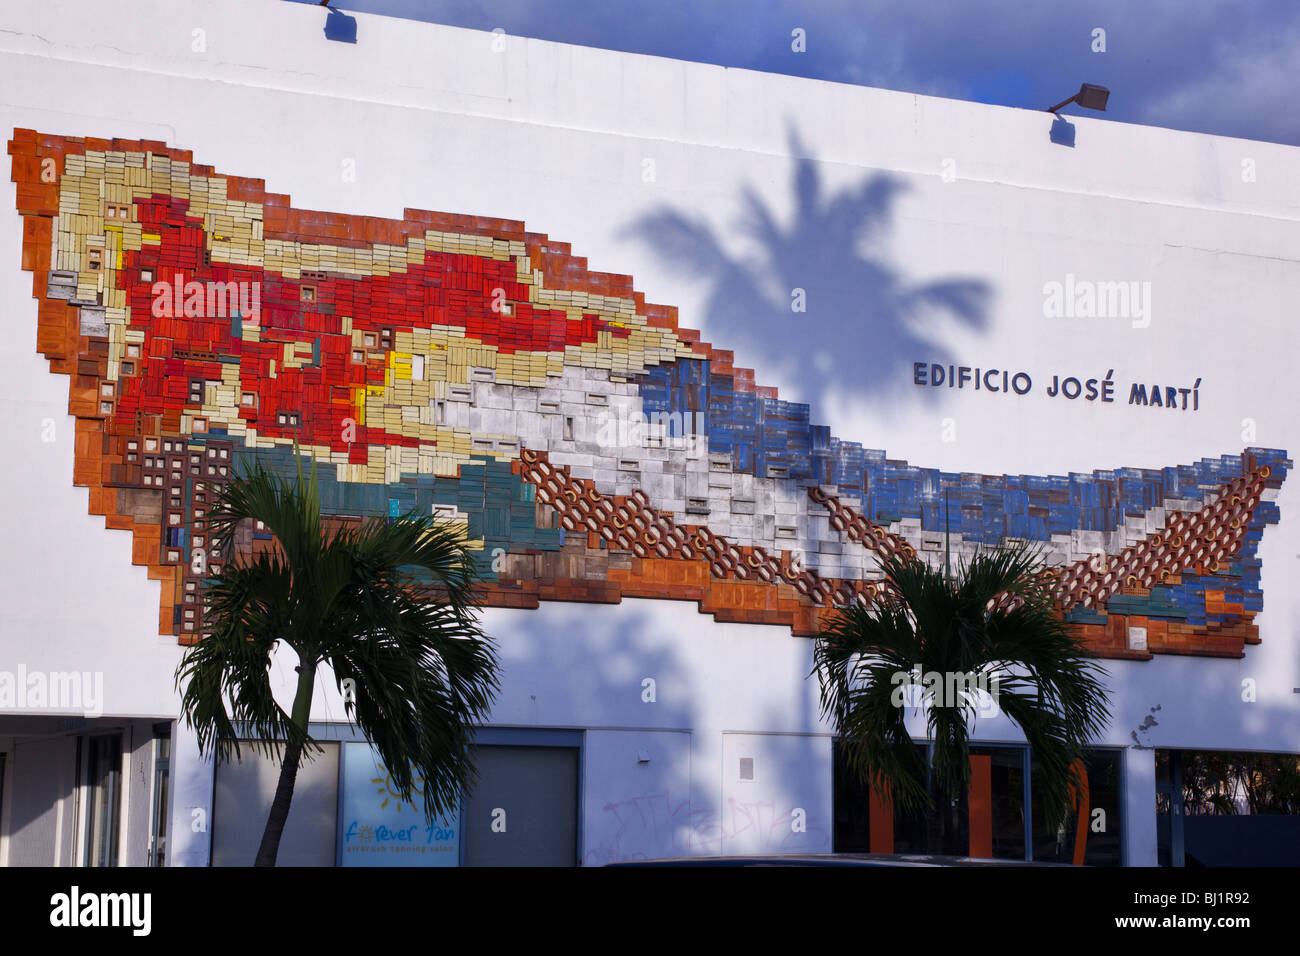 Mural of a Cuban region in the side of the José Martí building in Miami, Florida Stock Photo